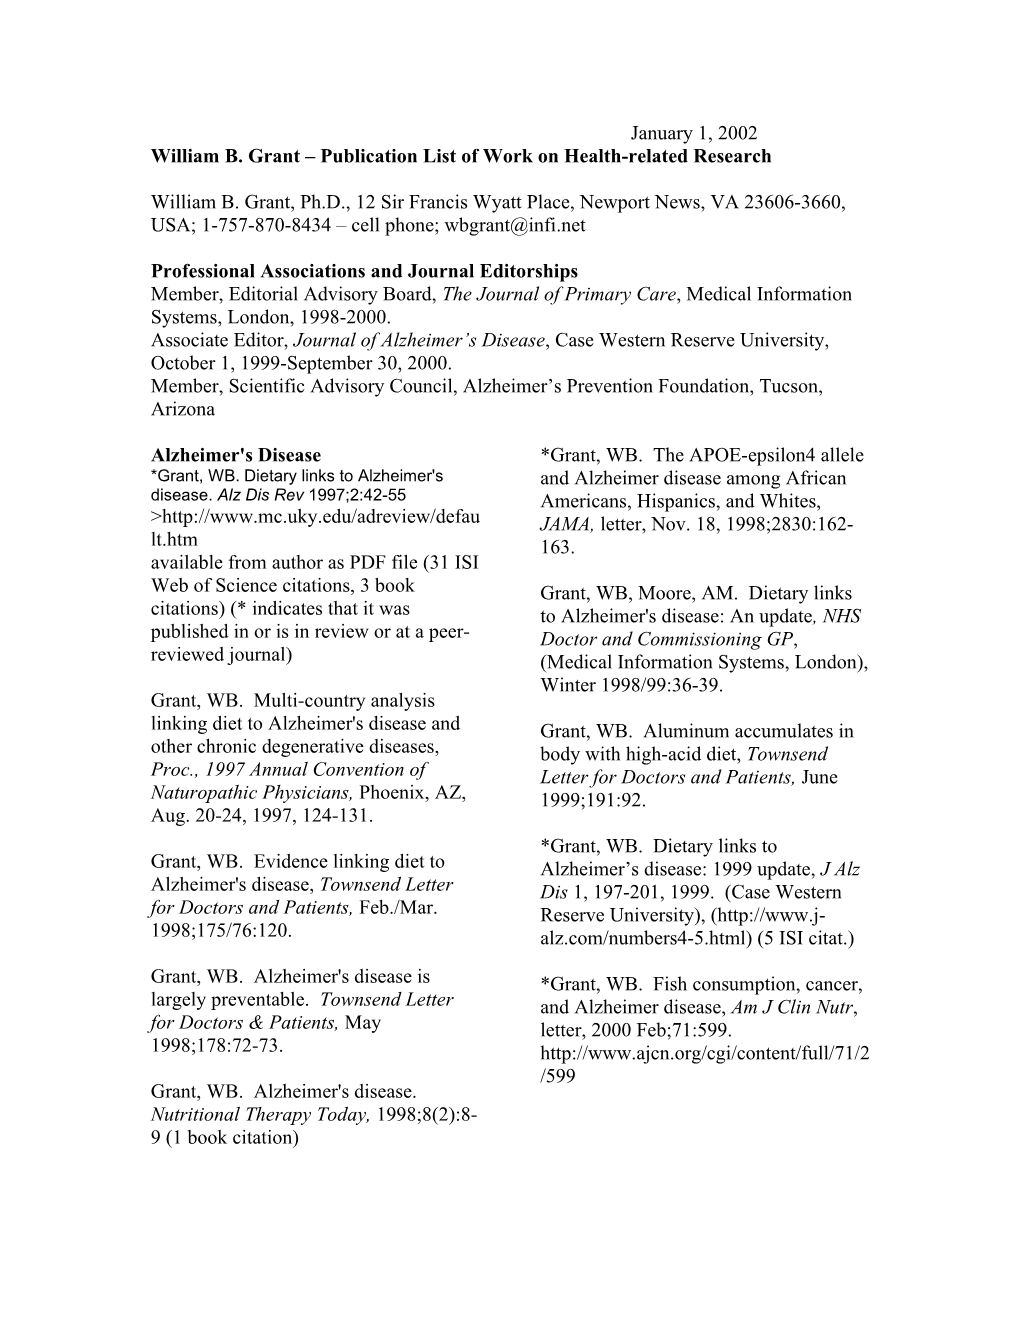 William B. Grant Publication List of Work on Health-Related Research